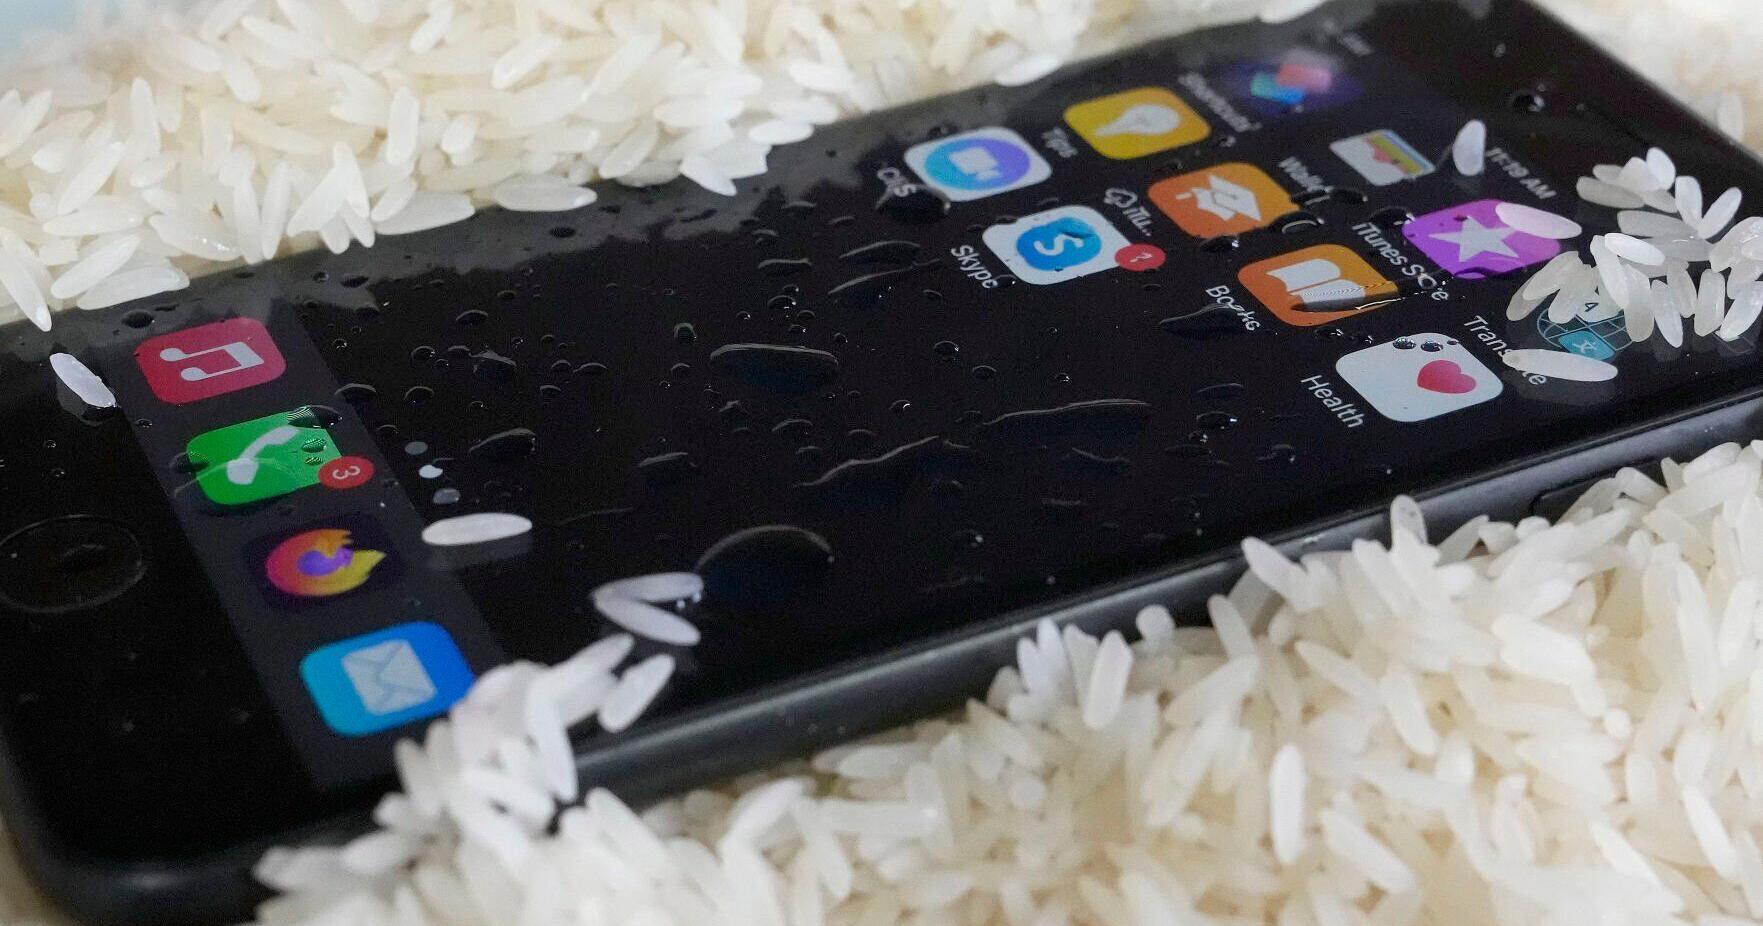 Don't use rice for your device. Here's how to dry out your smartphone